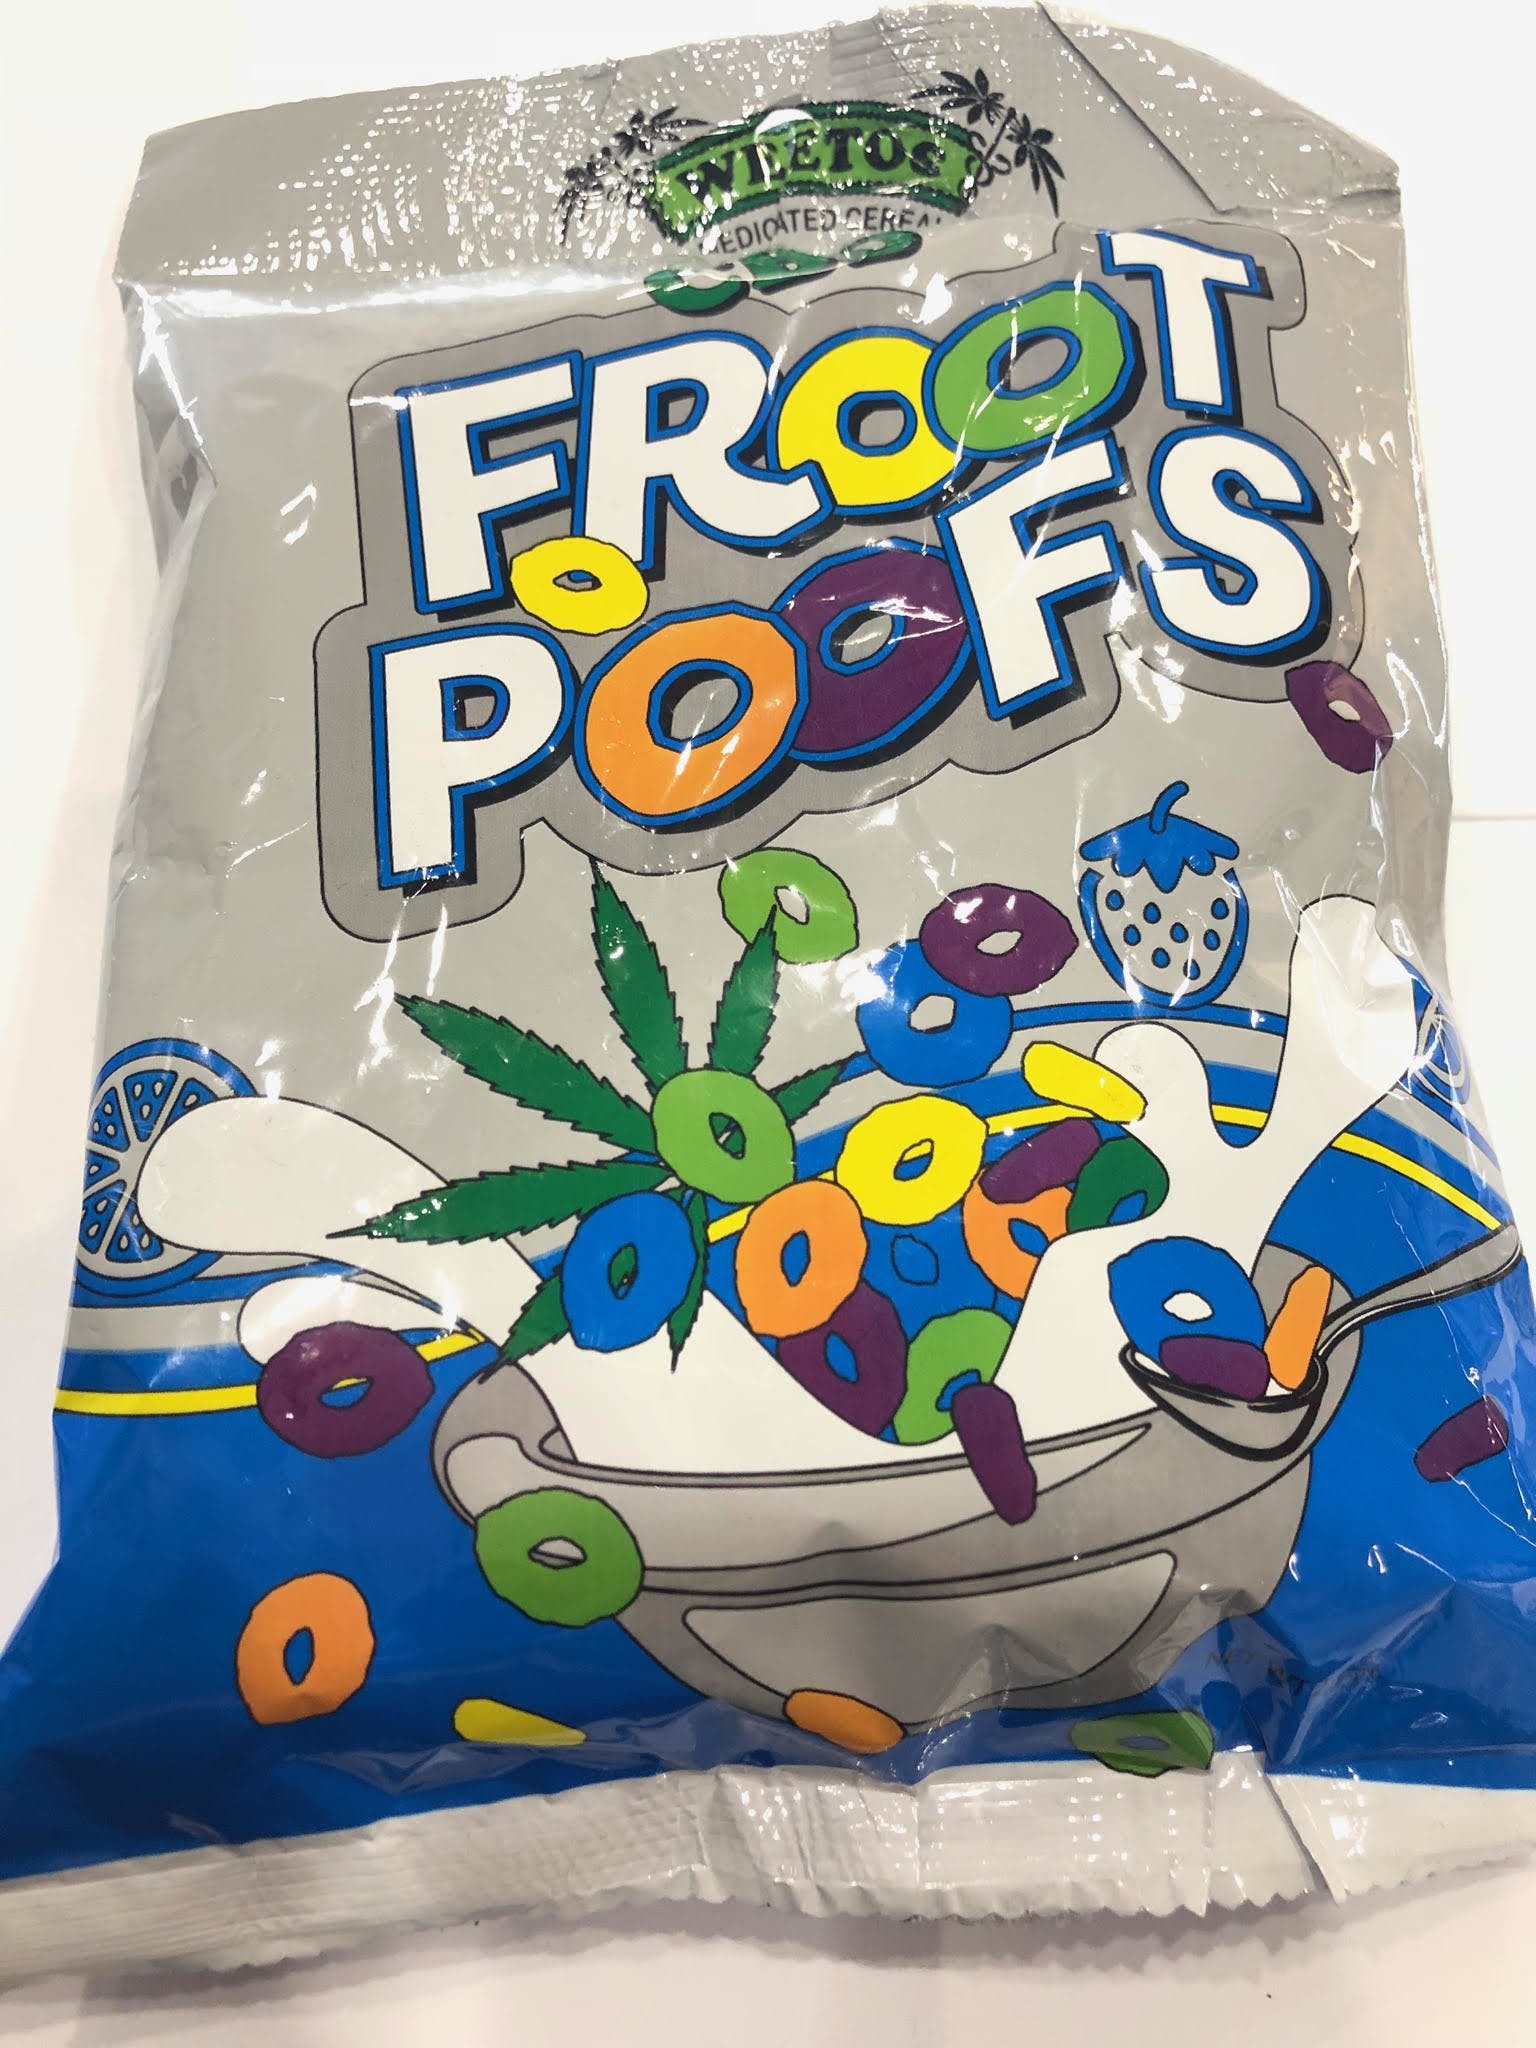 edible-weetos-cbd-froot-poofs